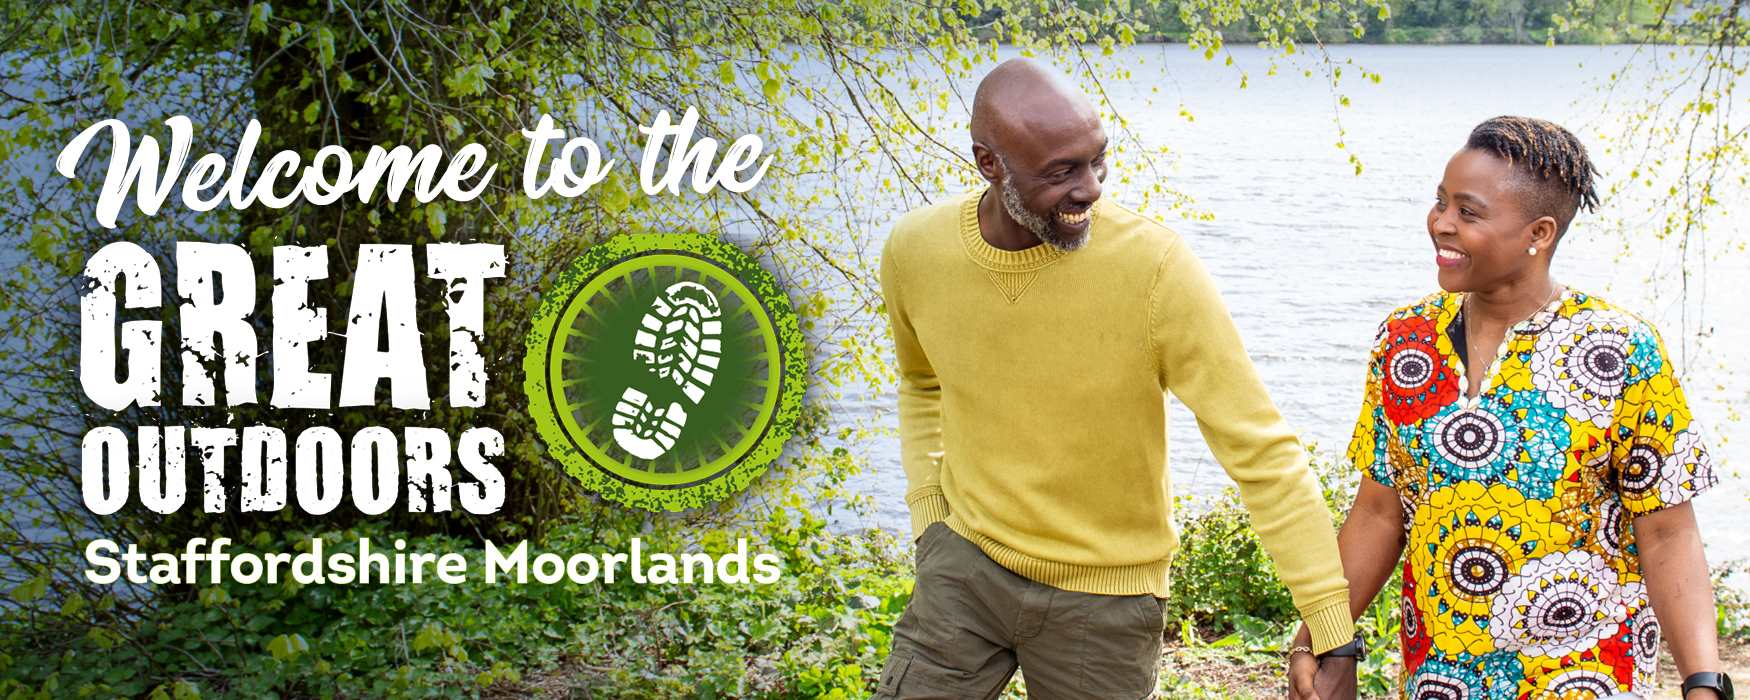 Welcome to the Great Outdoors in Staffordshire Moorlands. Man and woman holding hands walking by a lake.